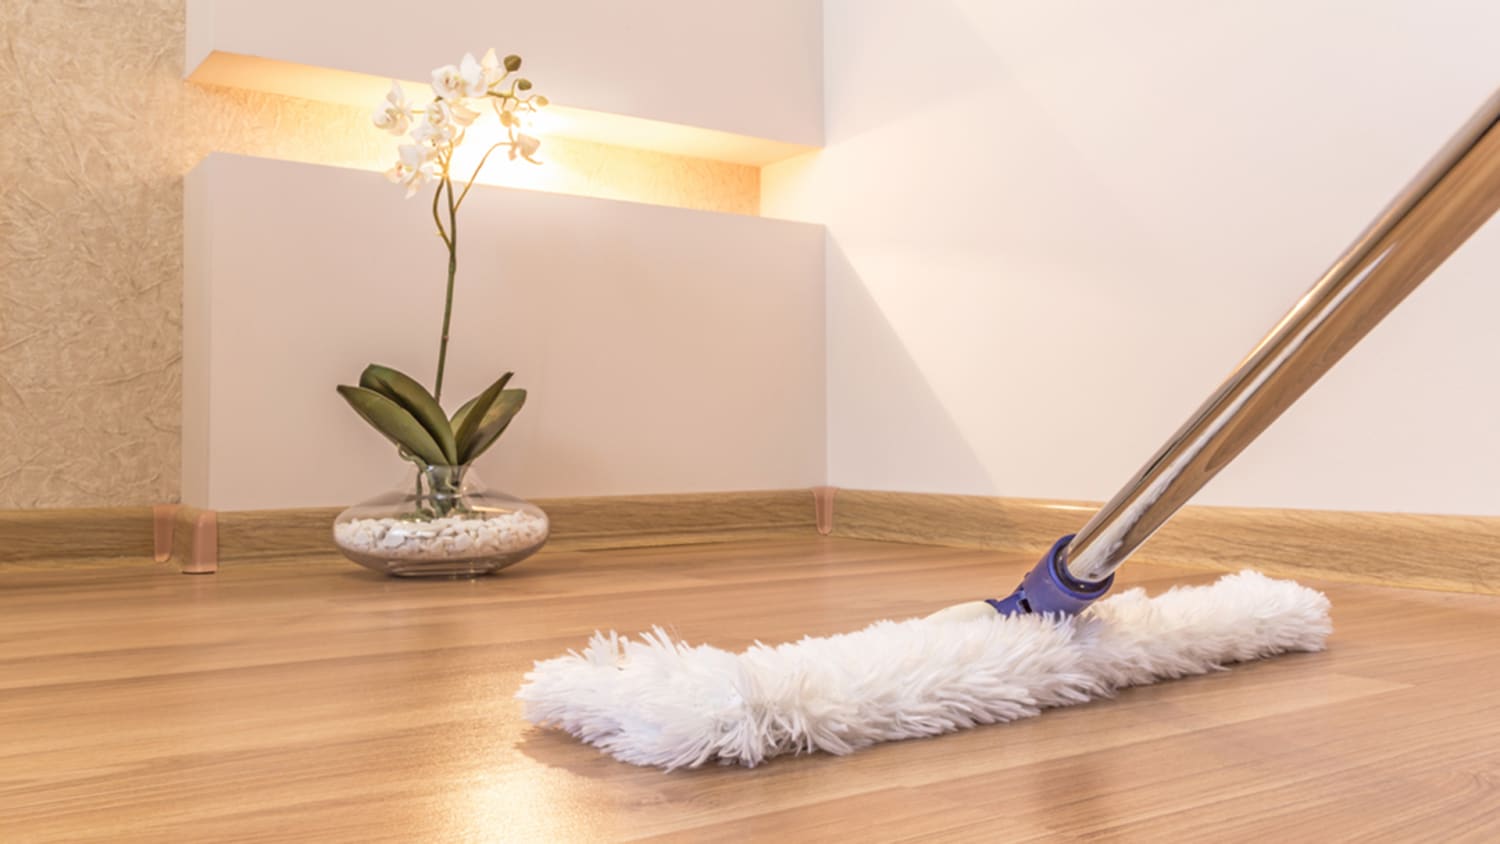 How To Clean Hardwood Floors The Right Way, What To Use To Seal Hardwood Floors